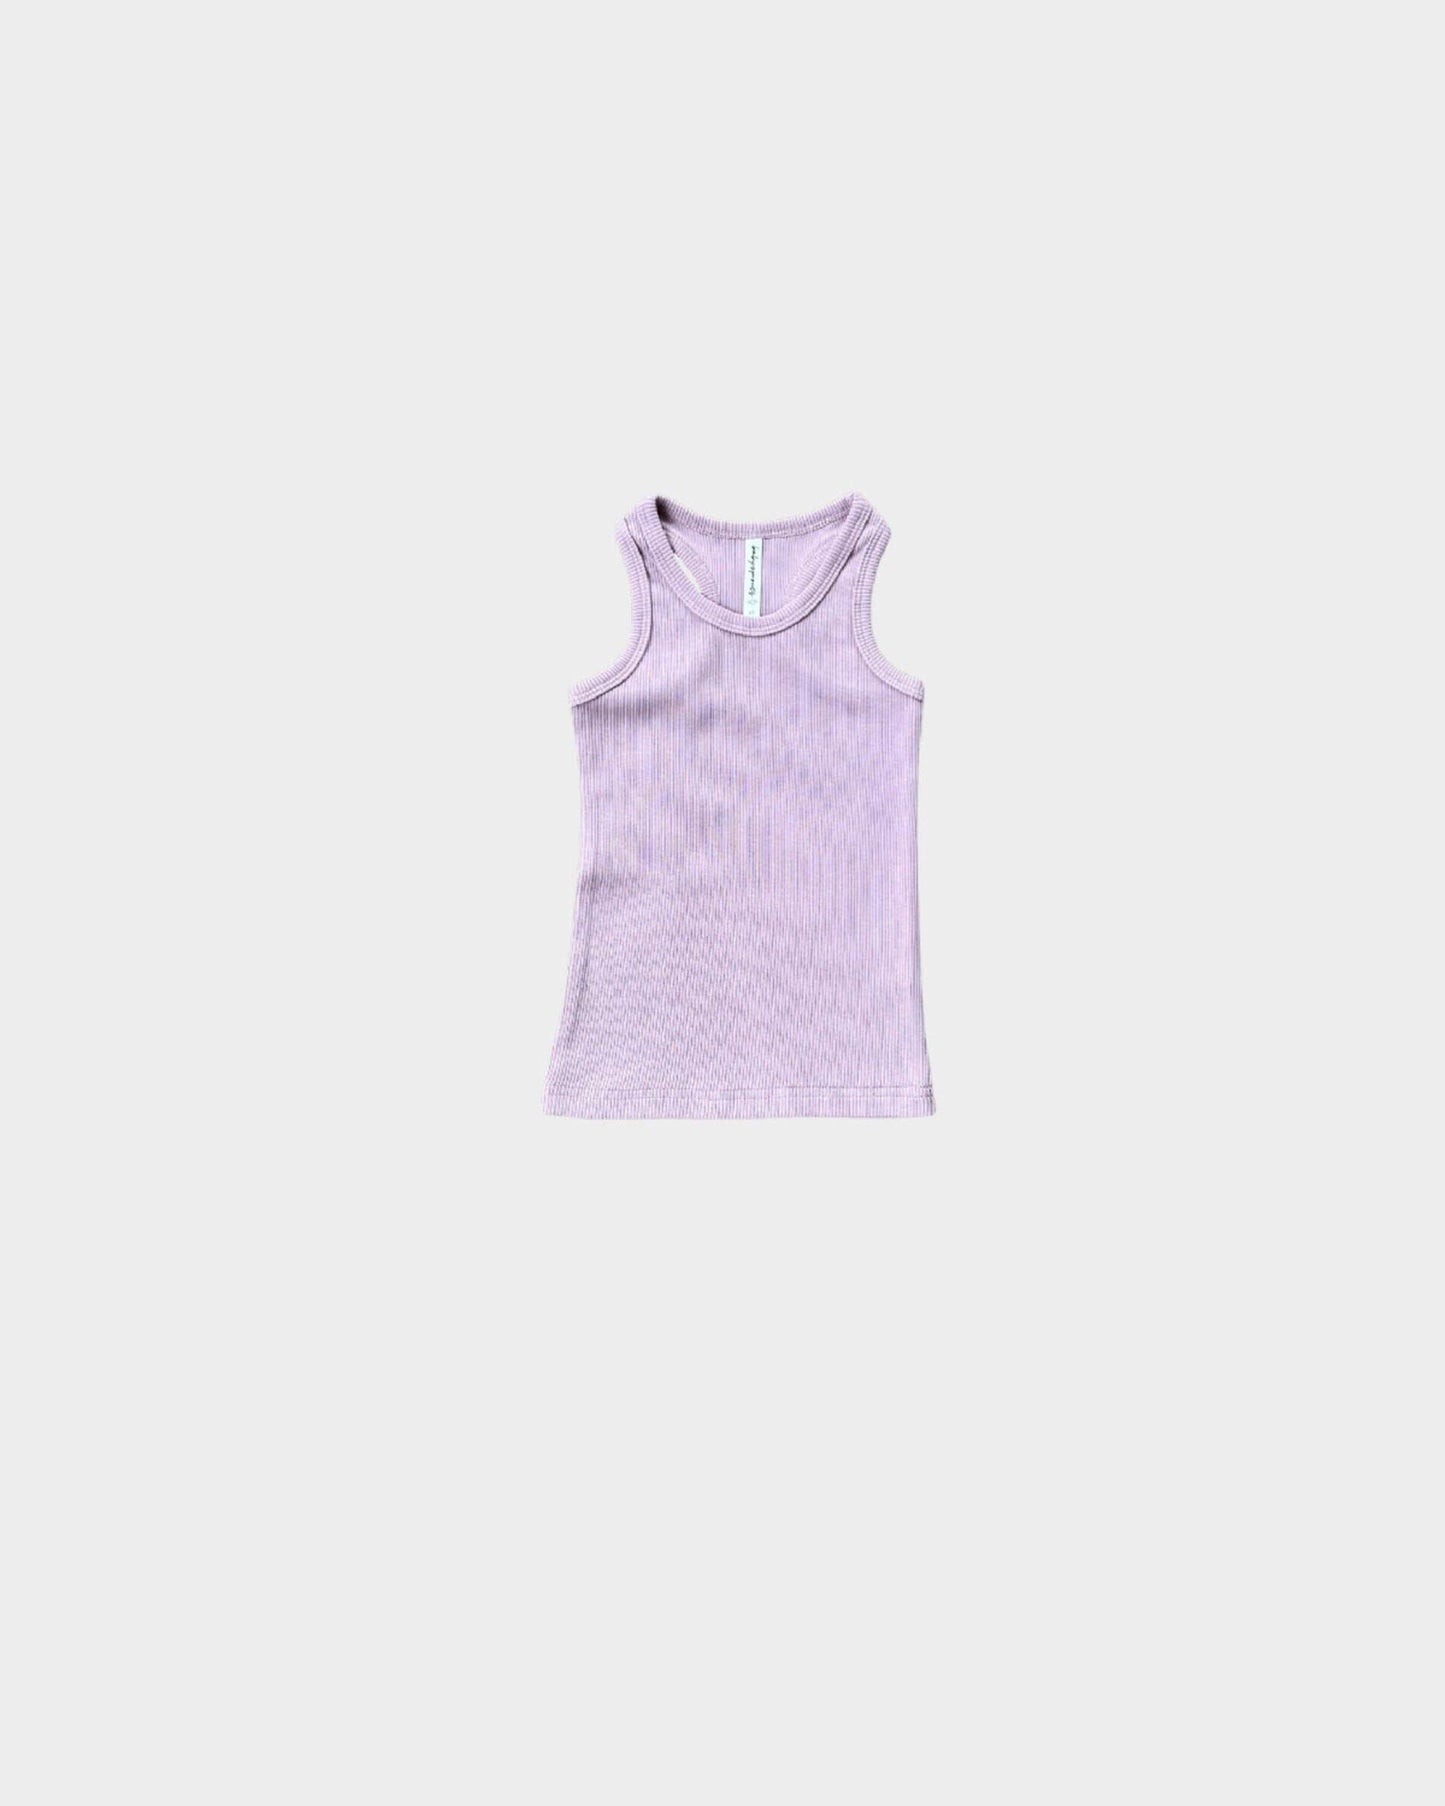 Lavender Rib Tank 150 GIRLS APPAREL 2-8 Baby Sprouts 2T 